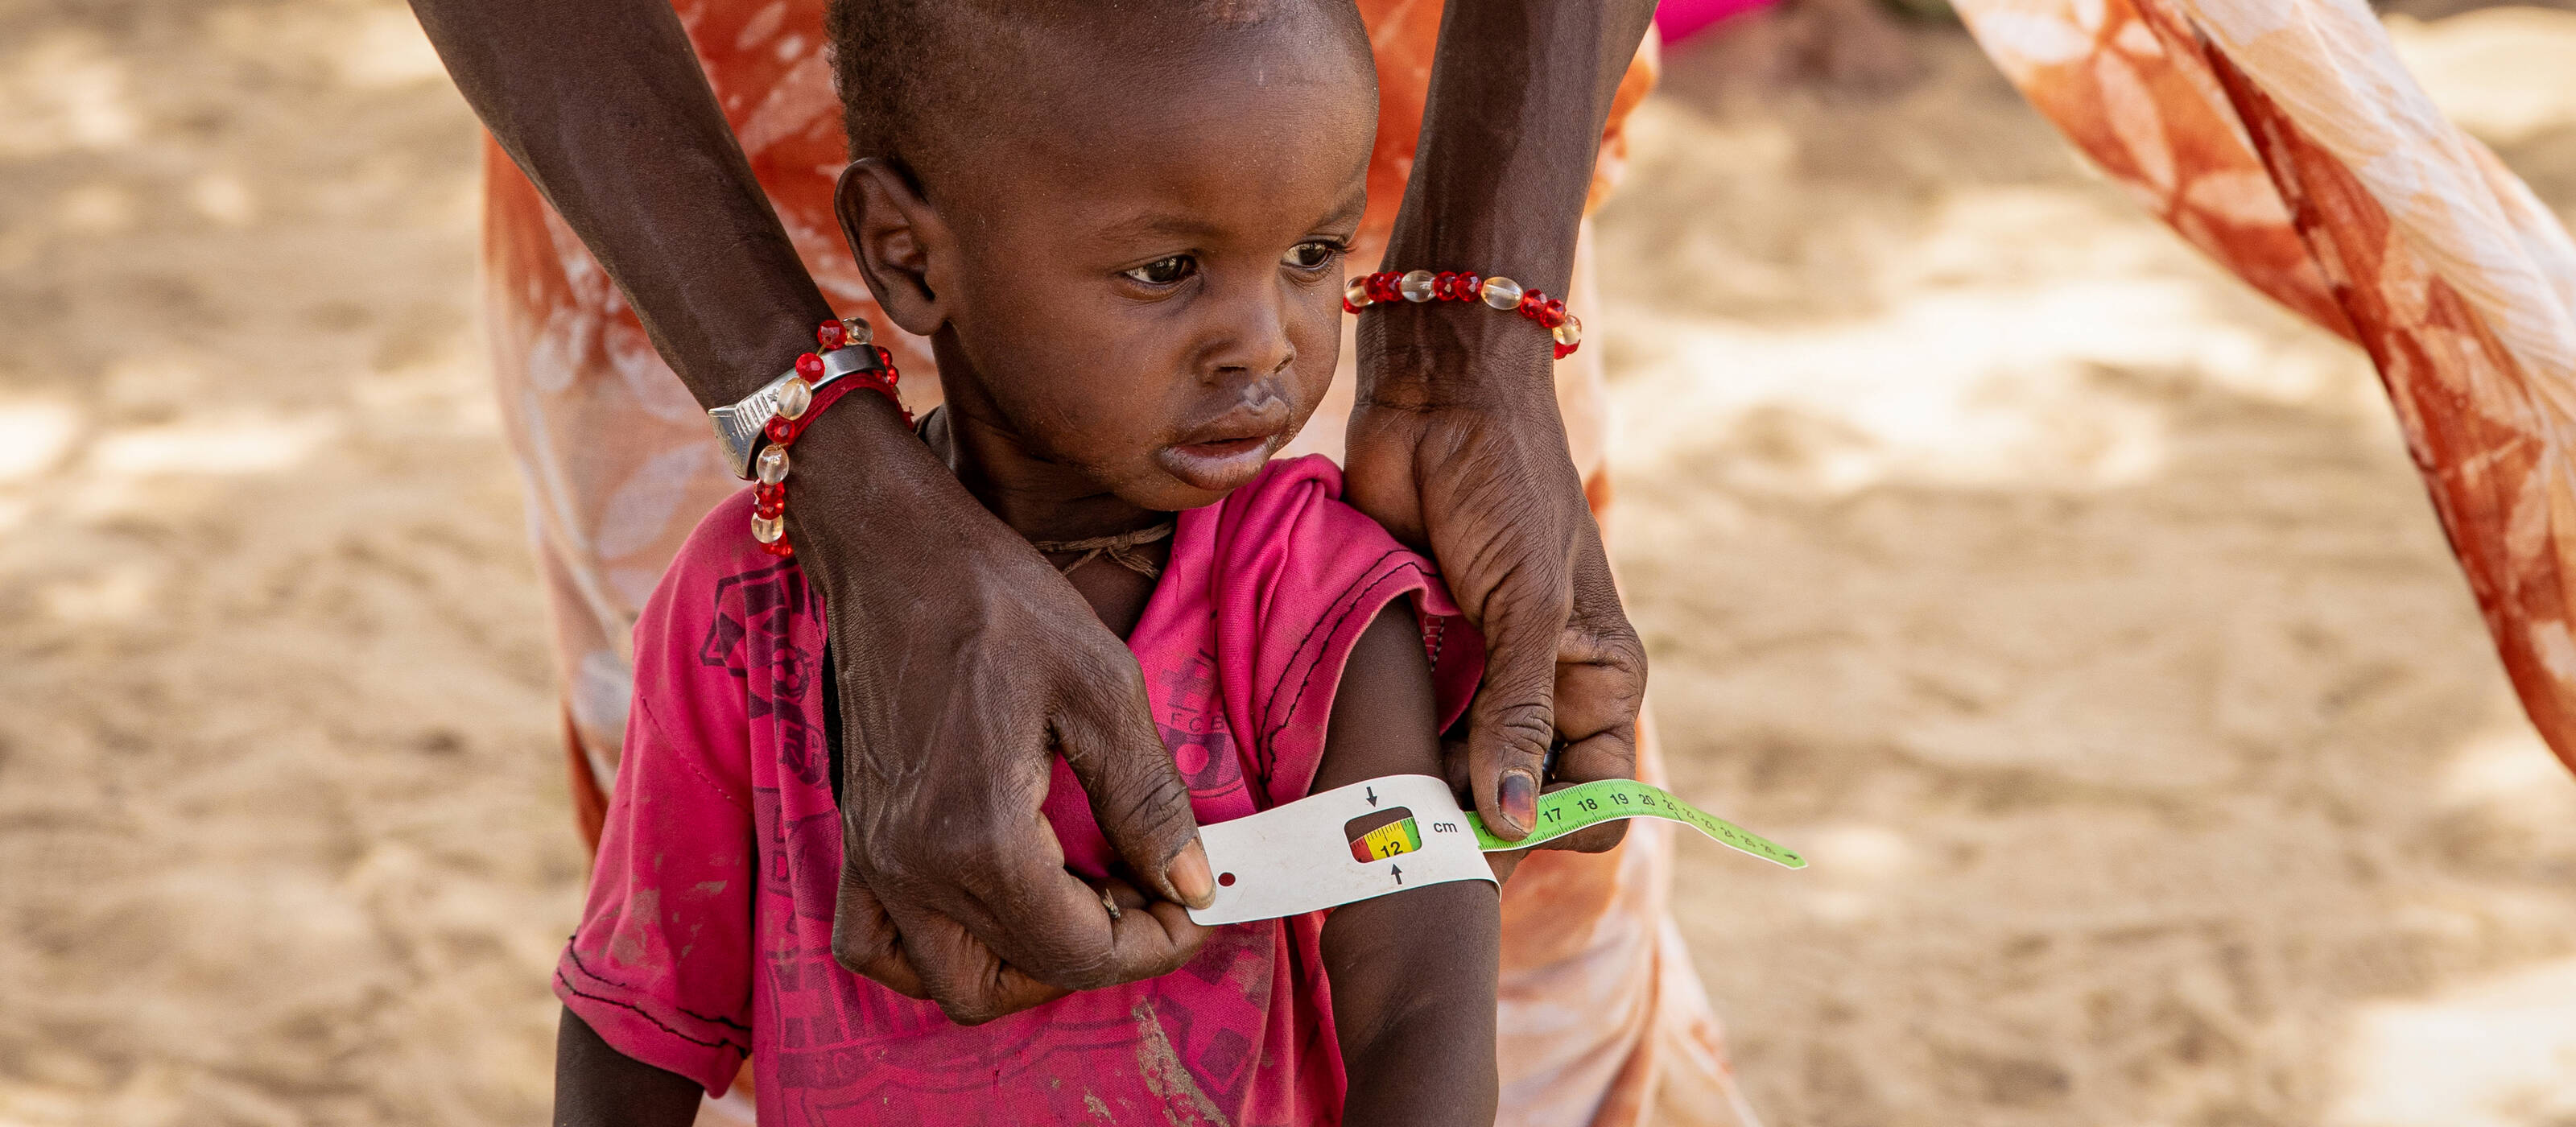 Malnourished and undernourished children abound in the region due to food and water shortages.